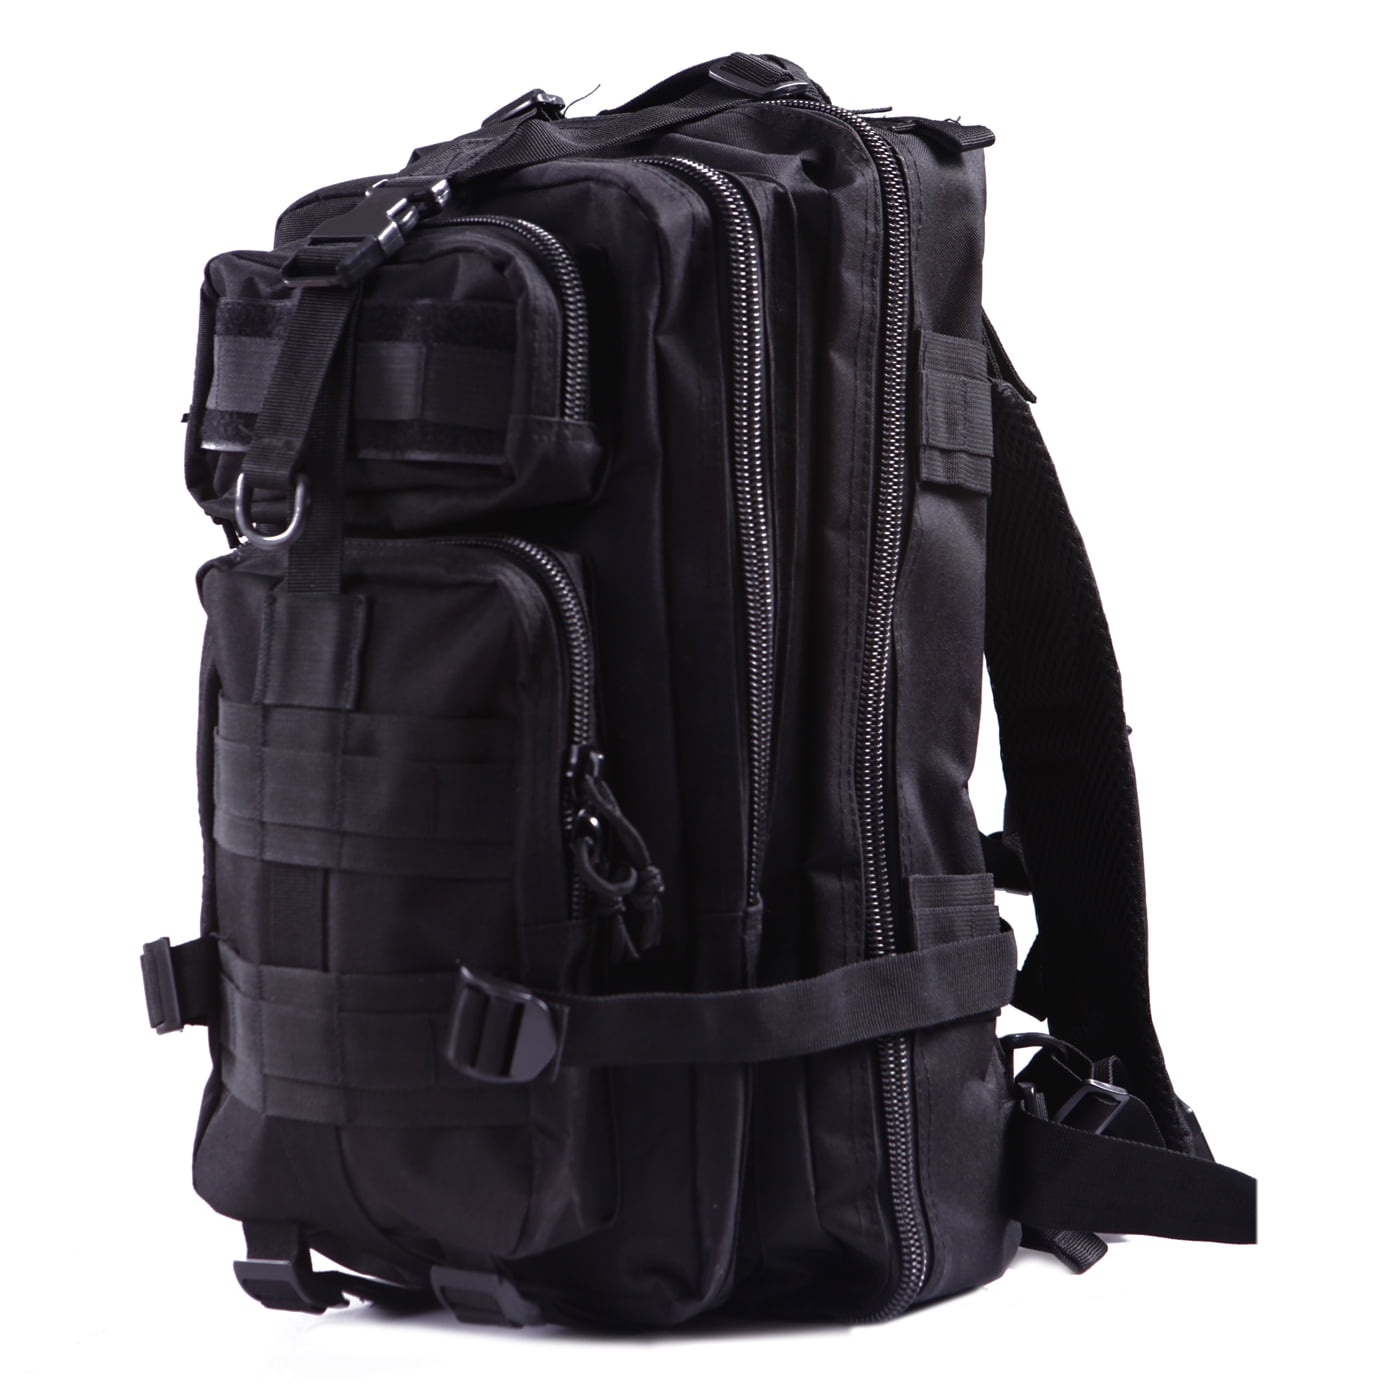 Expedition Pack 50L Black Military Tactical Molle Backpack Army Rucksack 